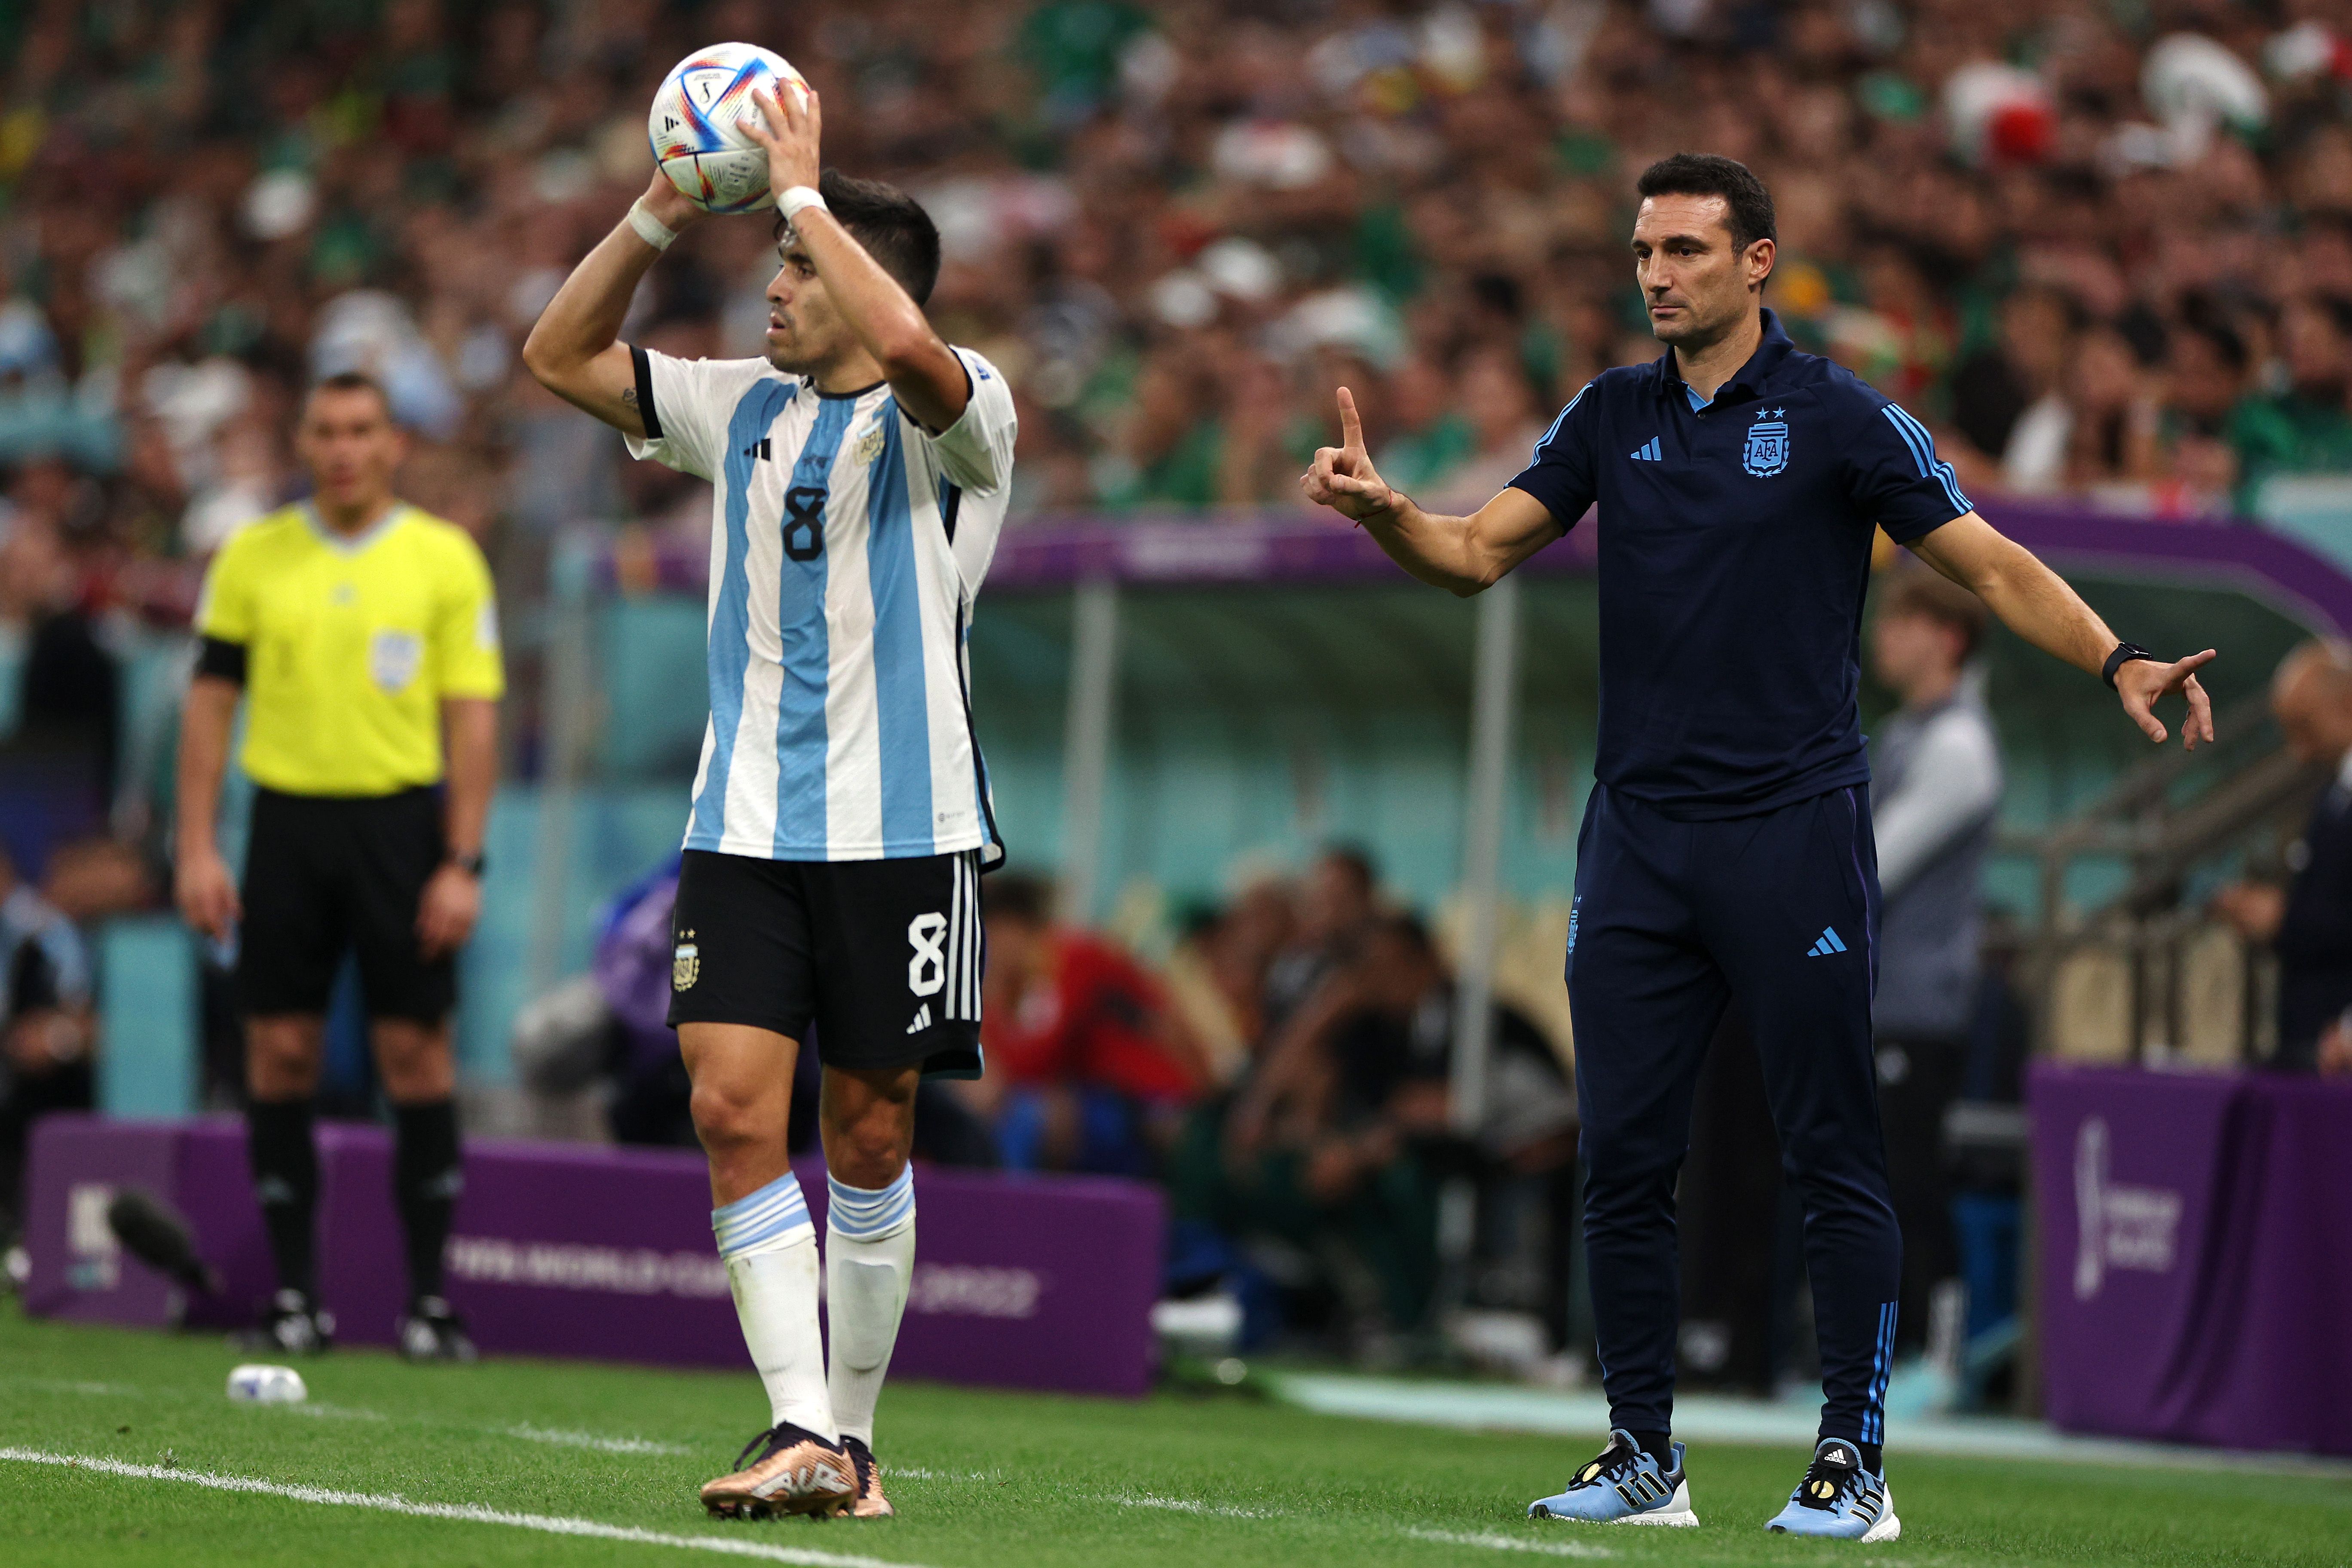 Marcos Acuna of Argentina prepares for a thrown in while Lionel Scaloni, Head Coach of Argentina, is seen during the FIFA World Cup Qatar 2022 Group C match between Argentina and Mexico at Lusail Stadium on November 26, 2022 in Lusail City, Qatar